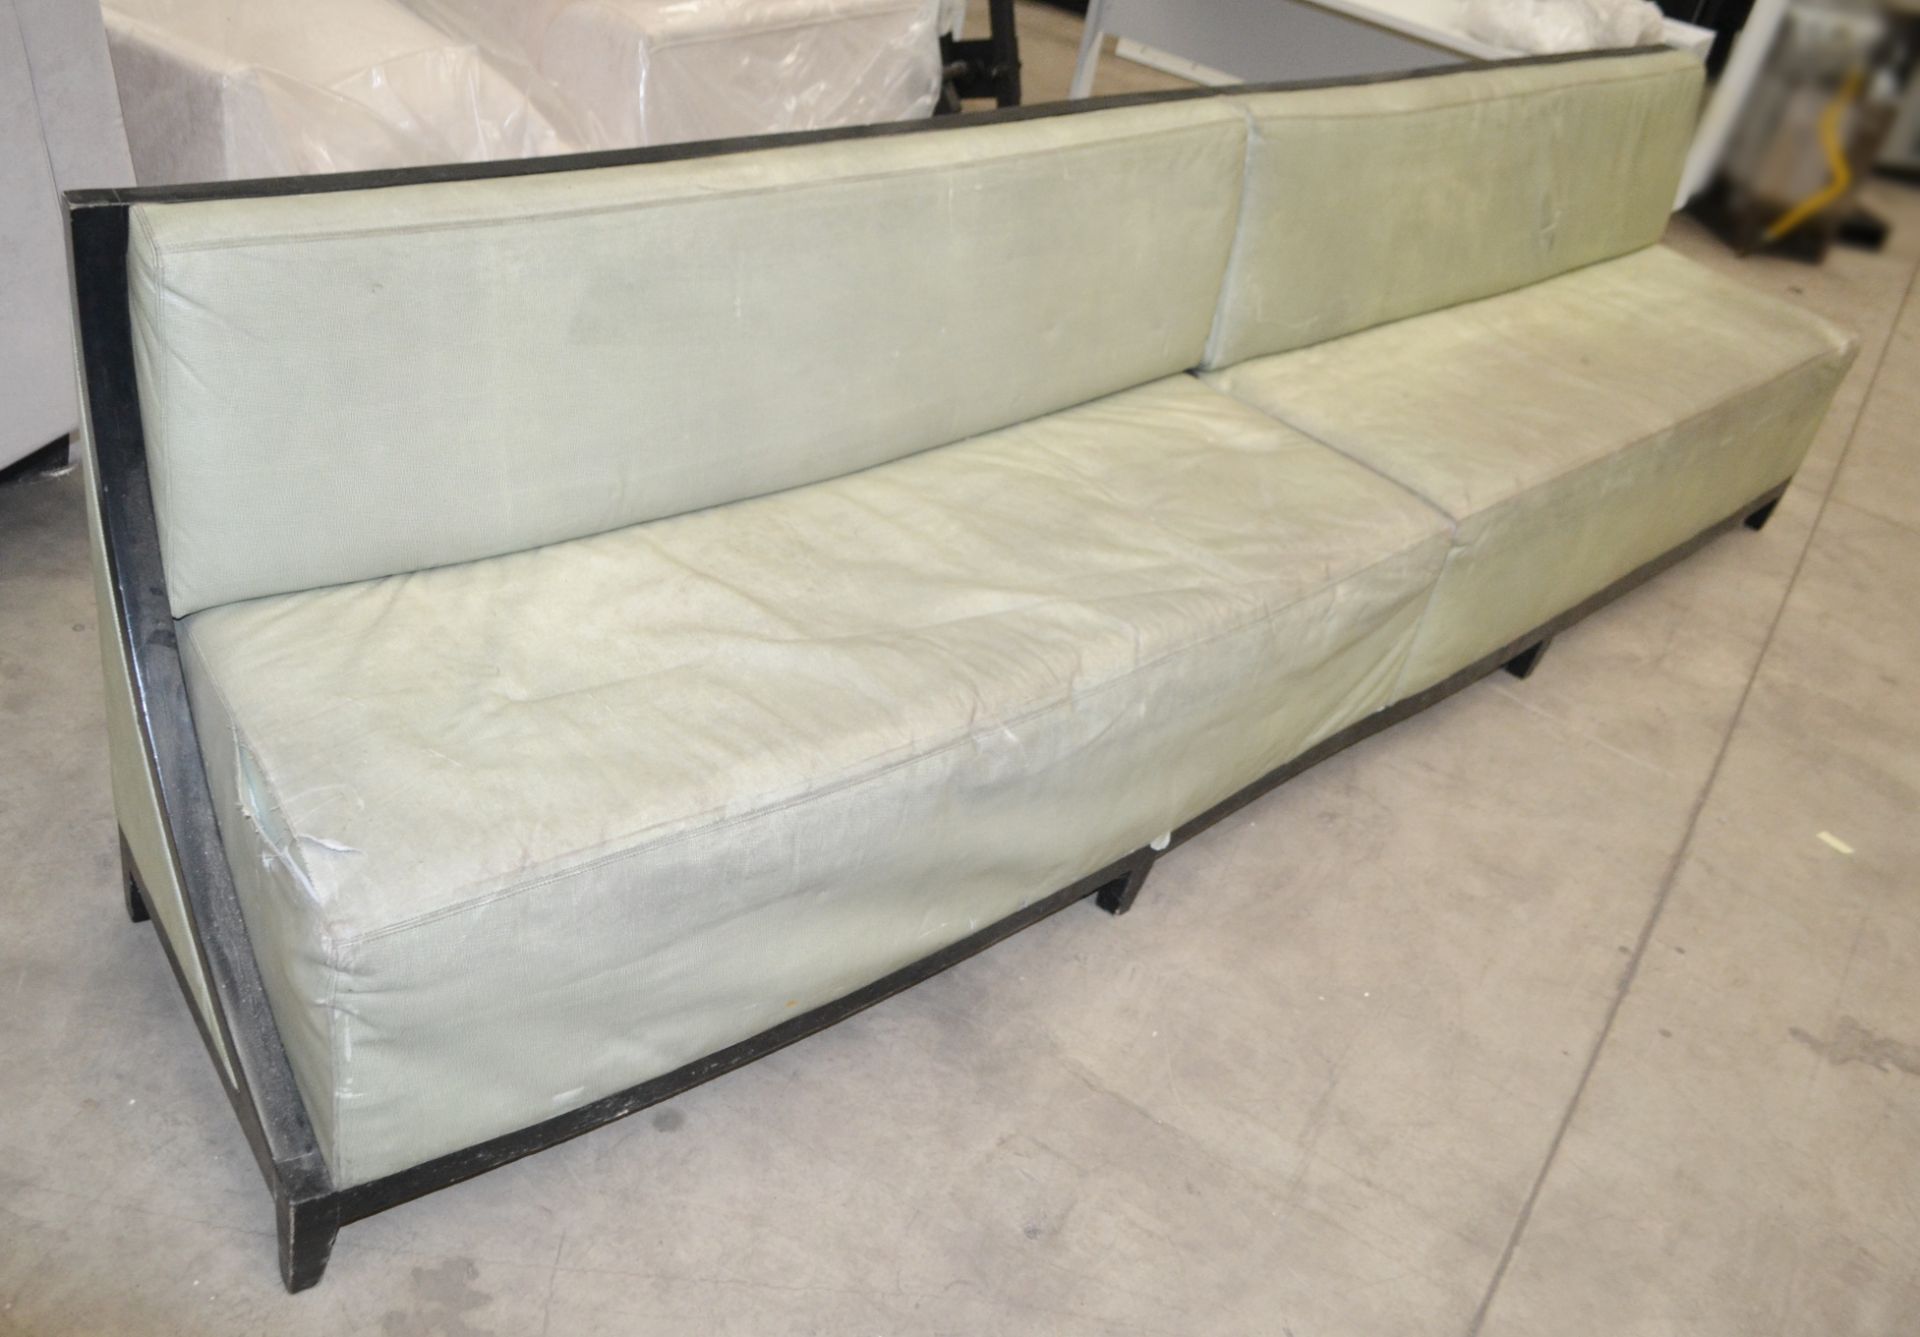 2 x Sections Of Curved Commercial Seating Upholstered In A Pale Green Faux Leather - Image 2 of 5